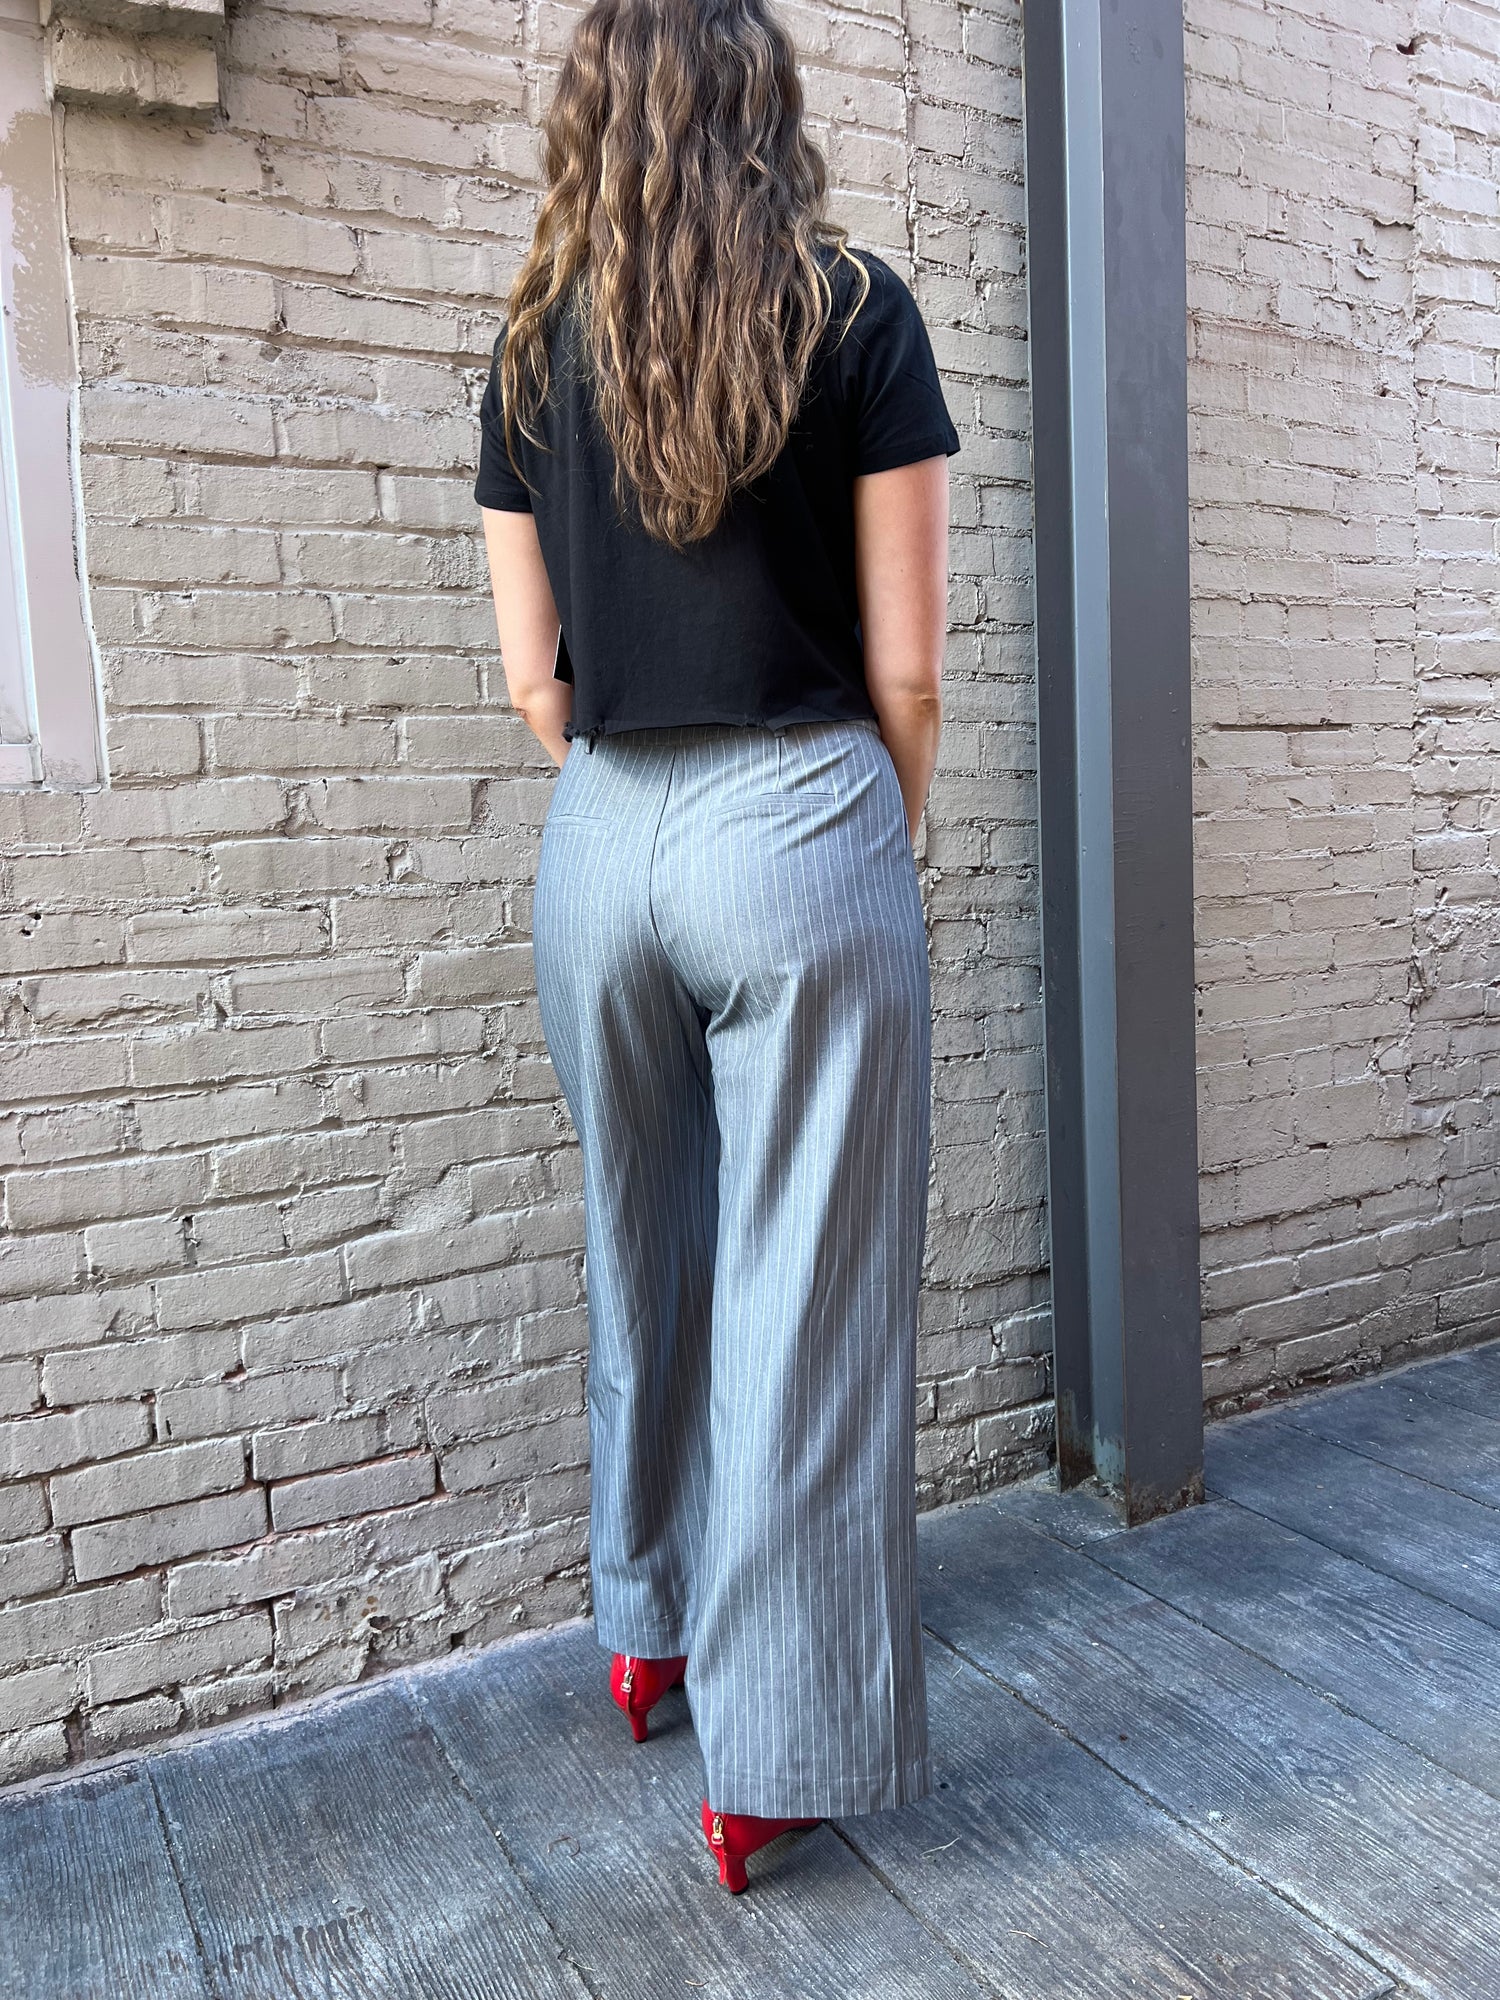 GRAY TAILORED BELTED PINSTIRE PANTS - THE HIP EAGLE BOUTIQUE